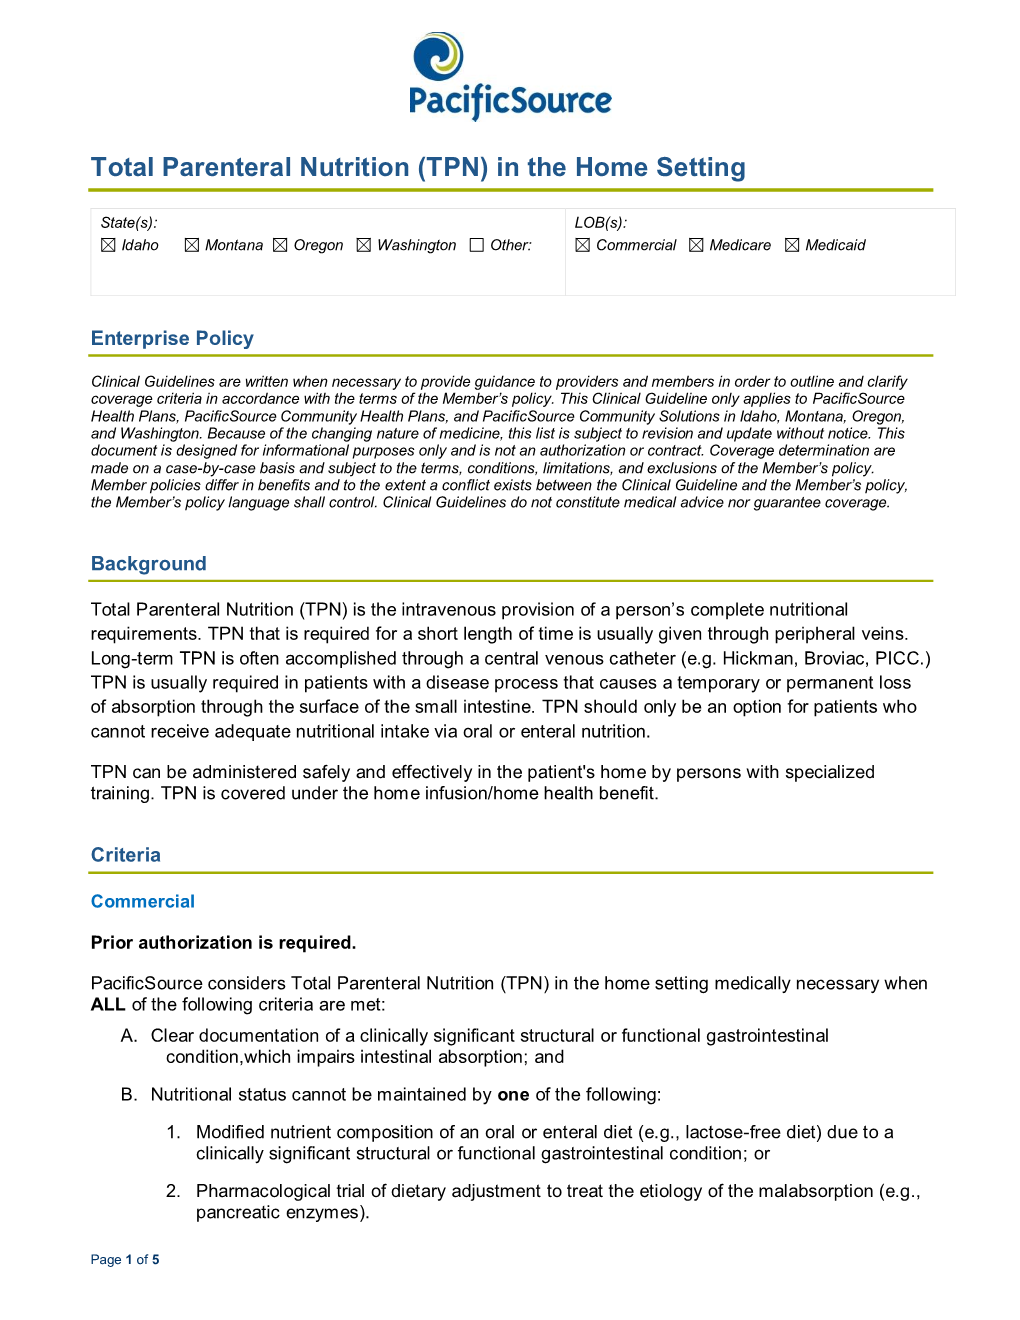 Total Parenteral Nutrition (TPN) in the Home Setting